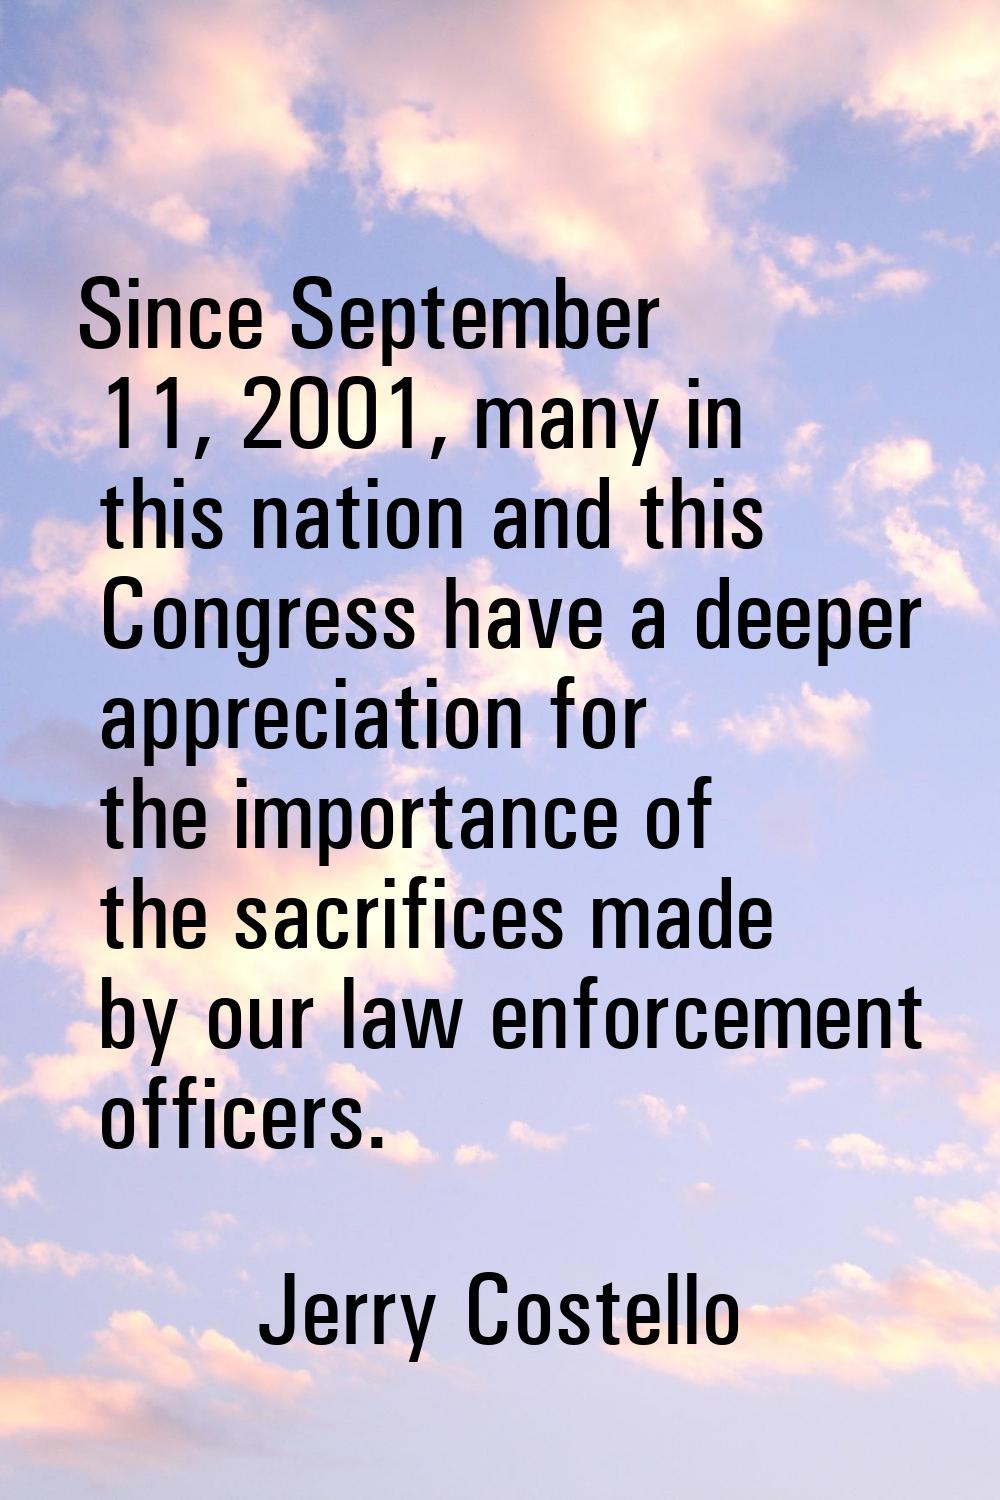 Since September 11, 2001, many in this nation and this Congress have a deeper appreciation for the 